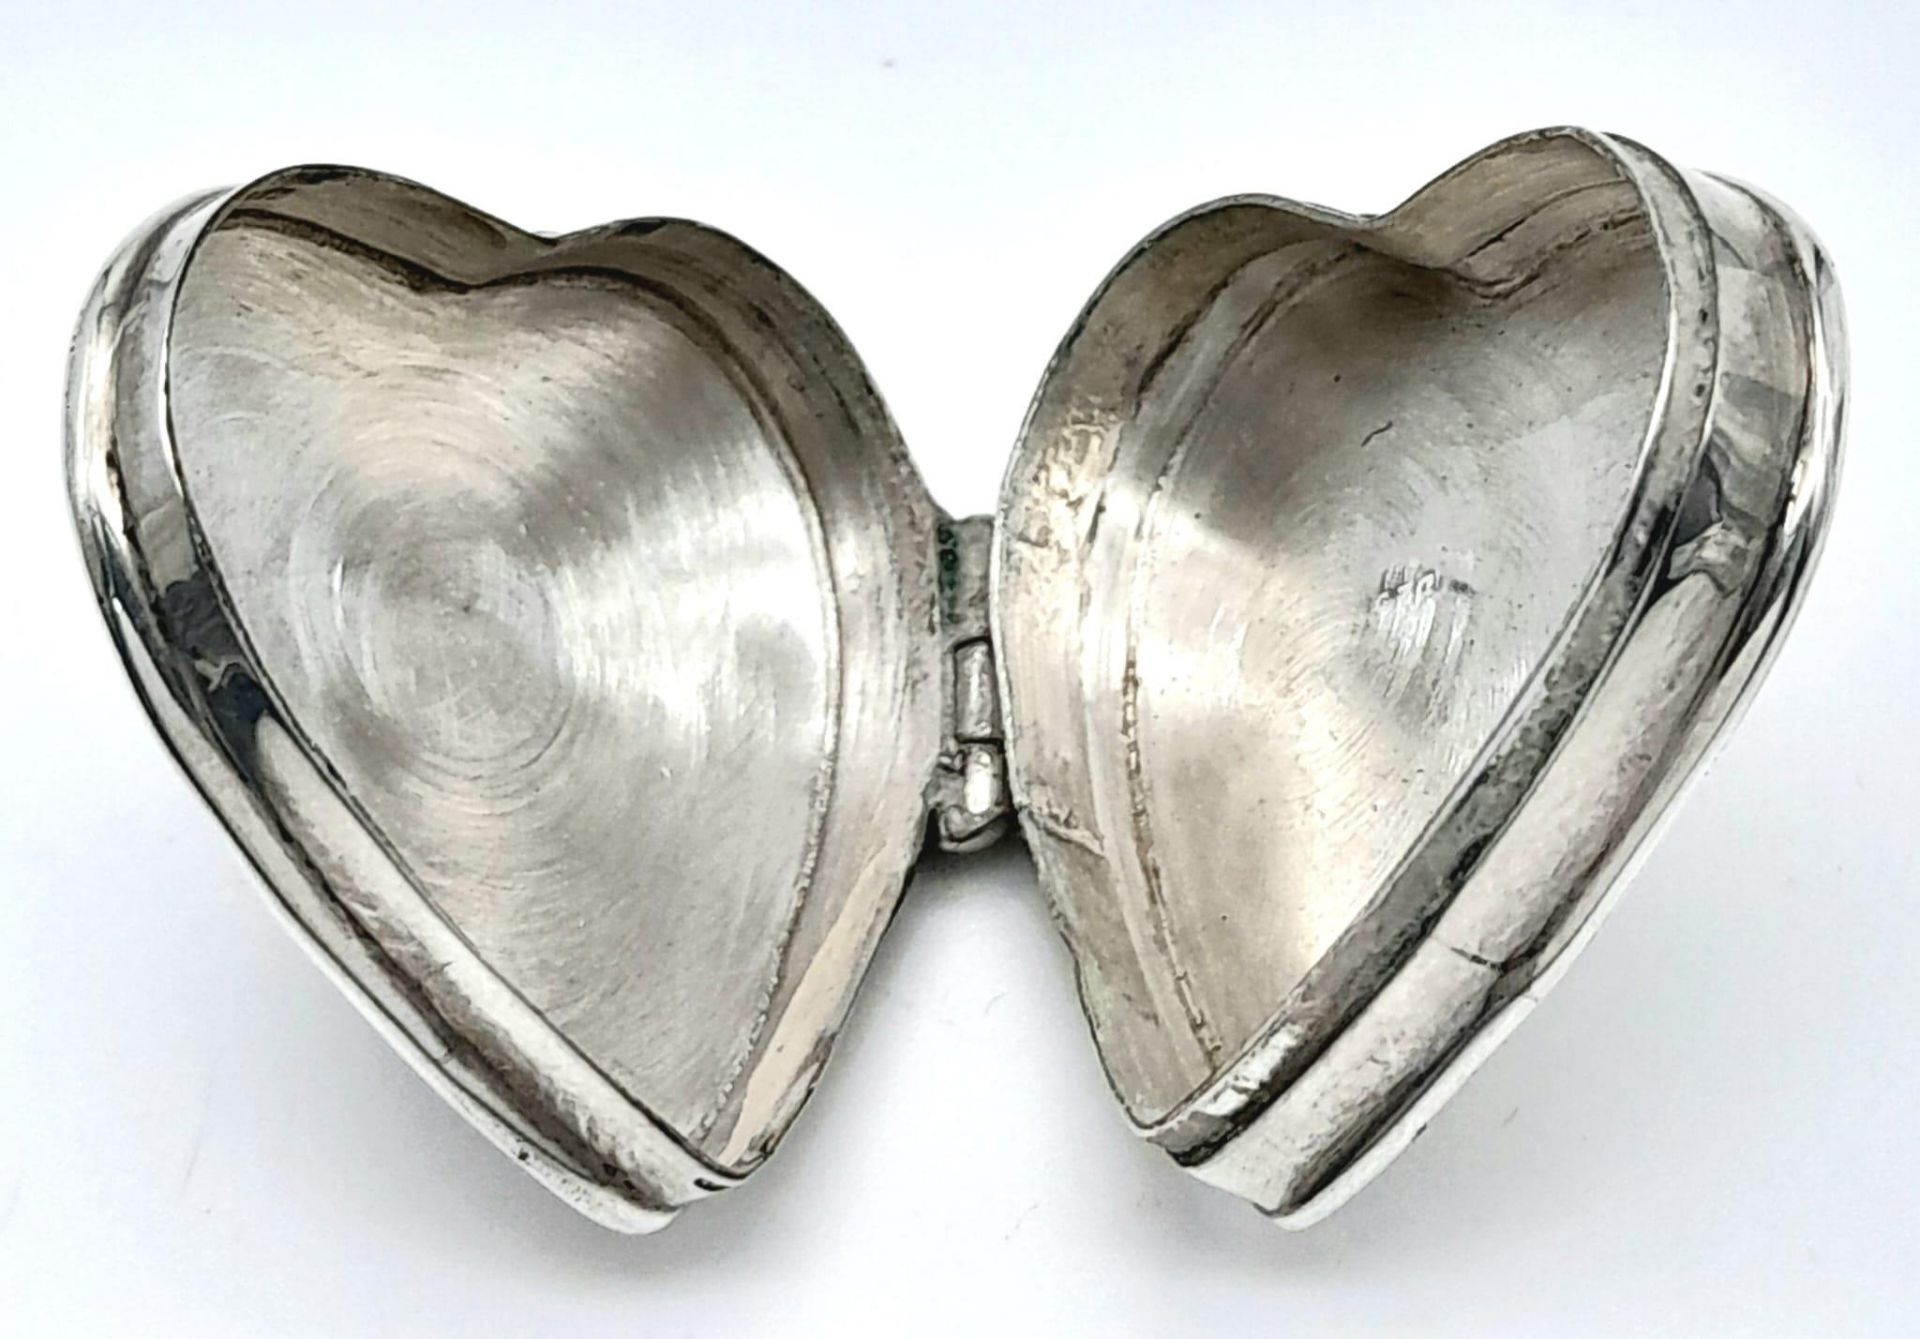 A Vintage Sterling Silver Heart Shaped Pill Box with Amethyst Decoration. Hallmarks at rear. 3.5 x - Image 3 of 5